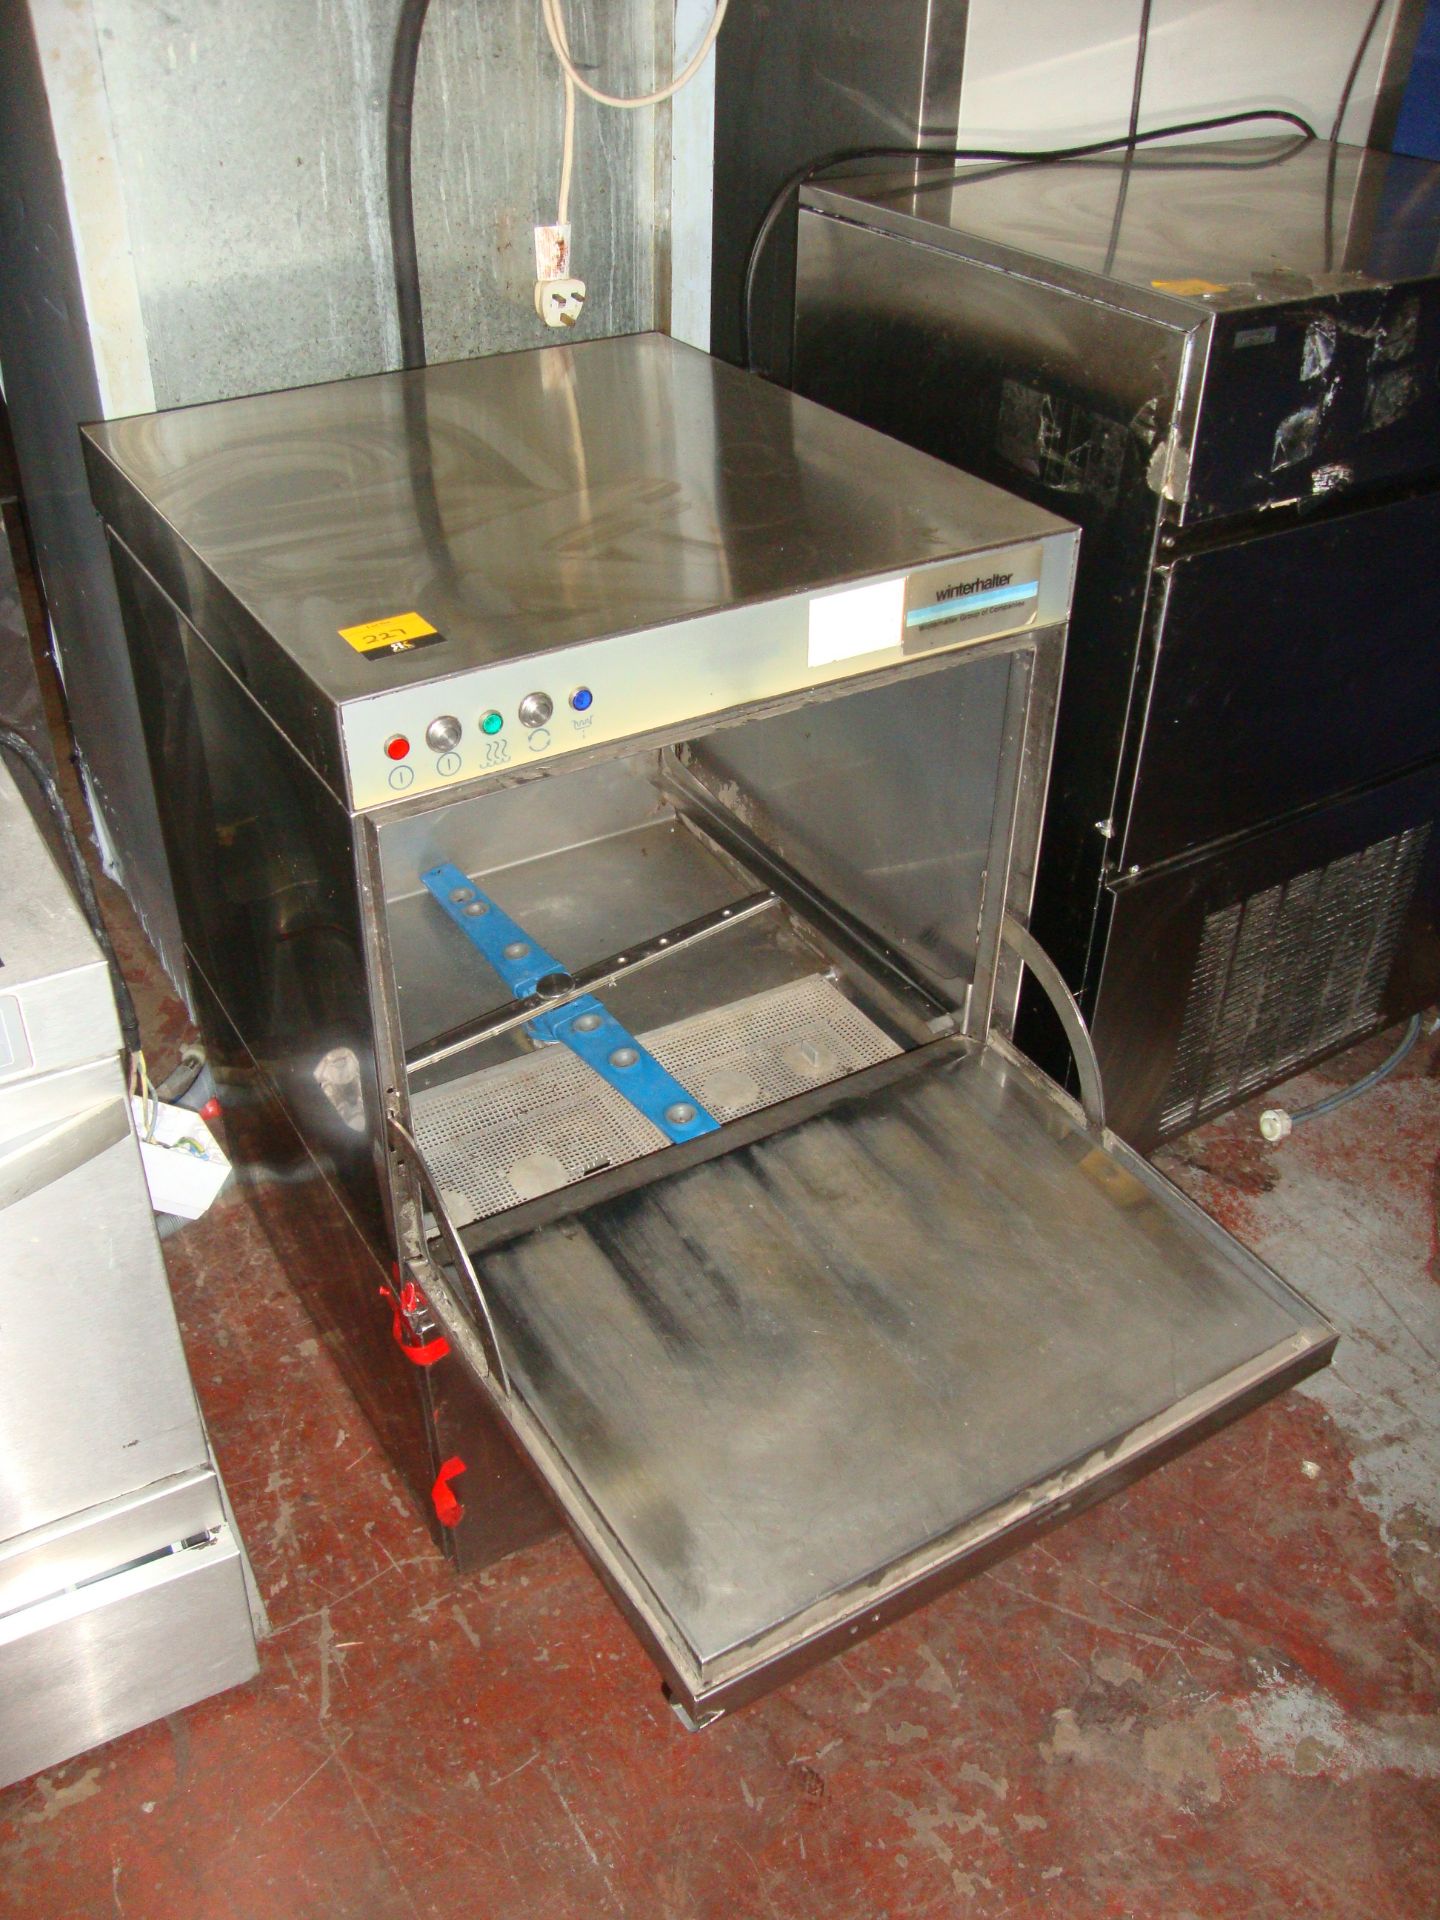 Winterhalter E308-V1 counter height stainless steel glass washer/dishwasher - all faults - Image 2 of 4